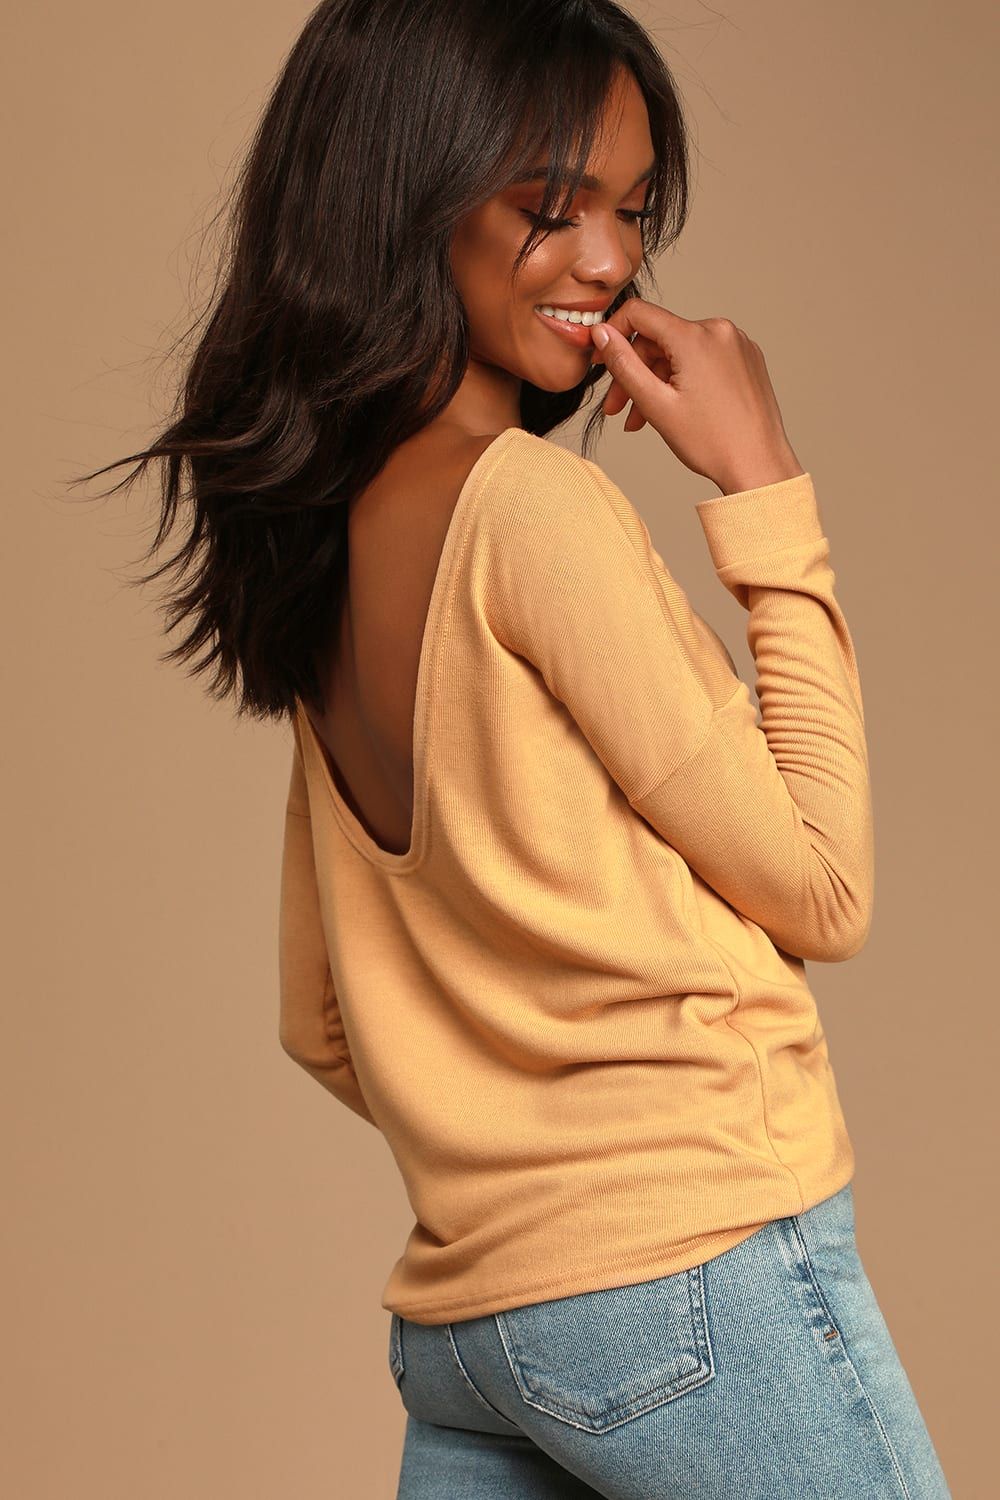 Afternoon Daydream Mustard Yellow Backless Sweater | Lulus (US)